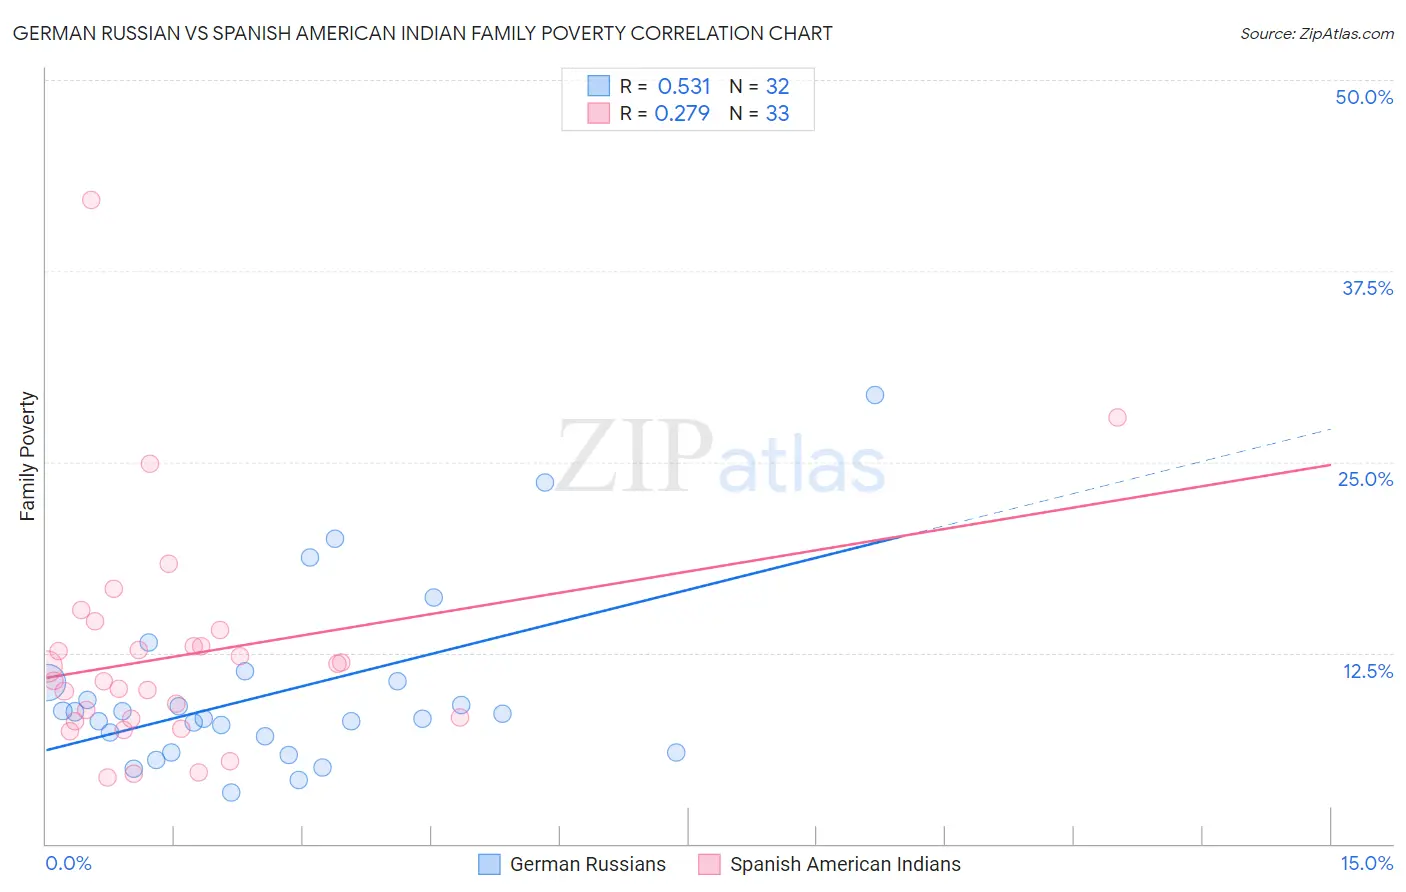 German Russian vs Spanish American Indian Family Poverty